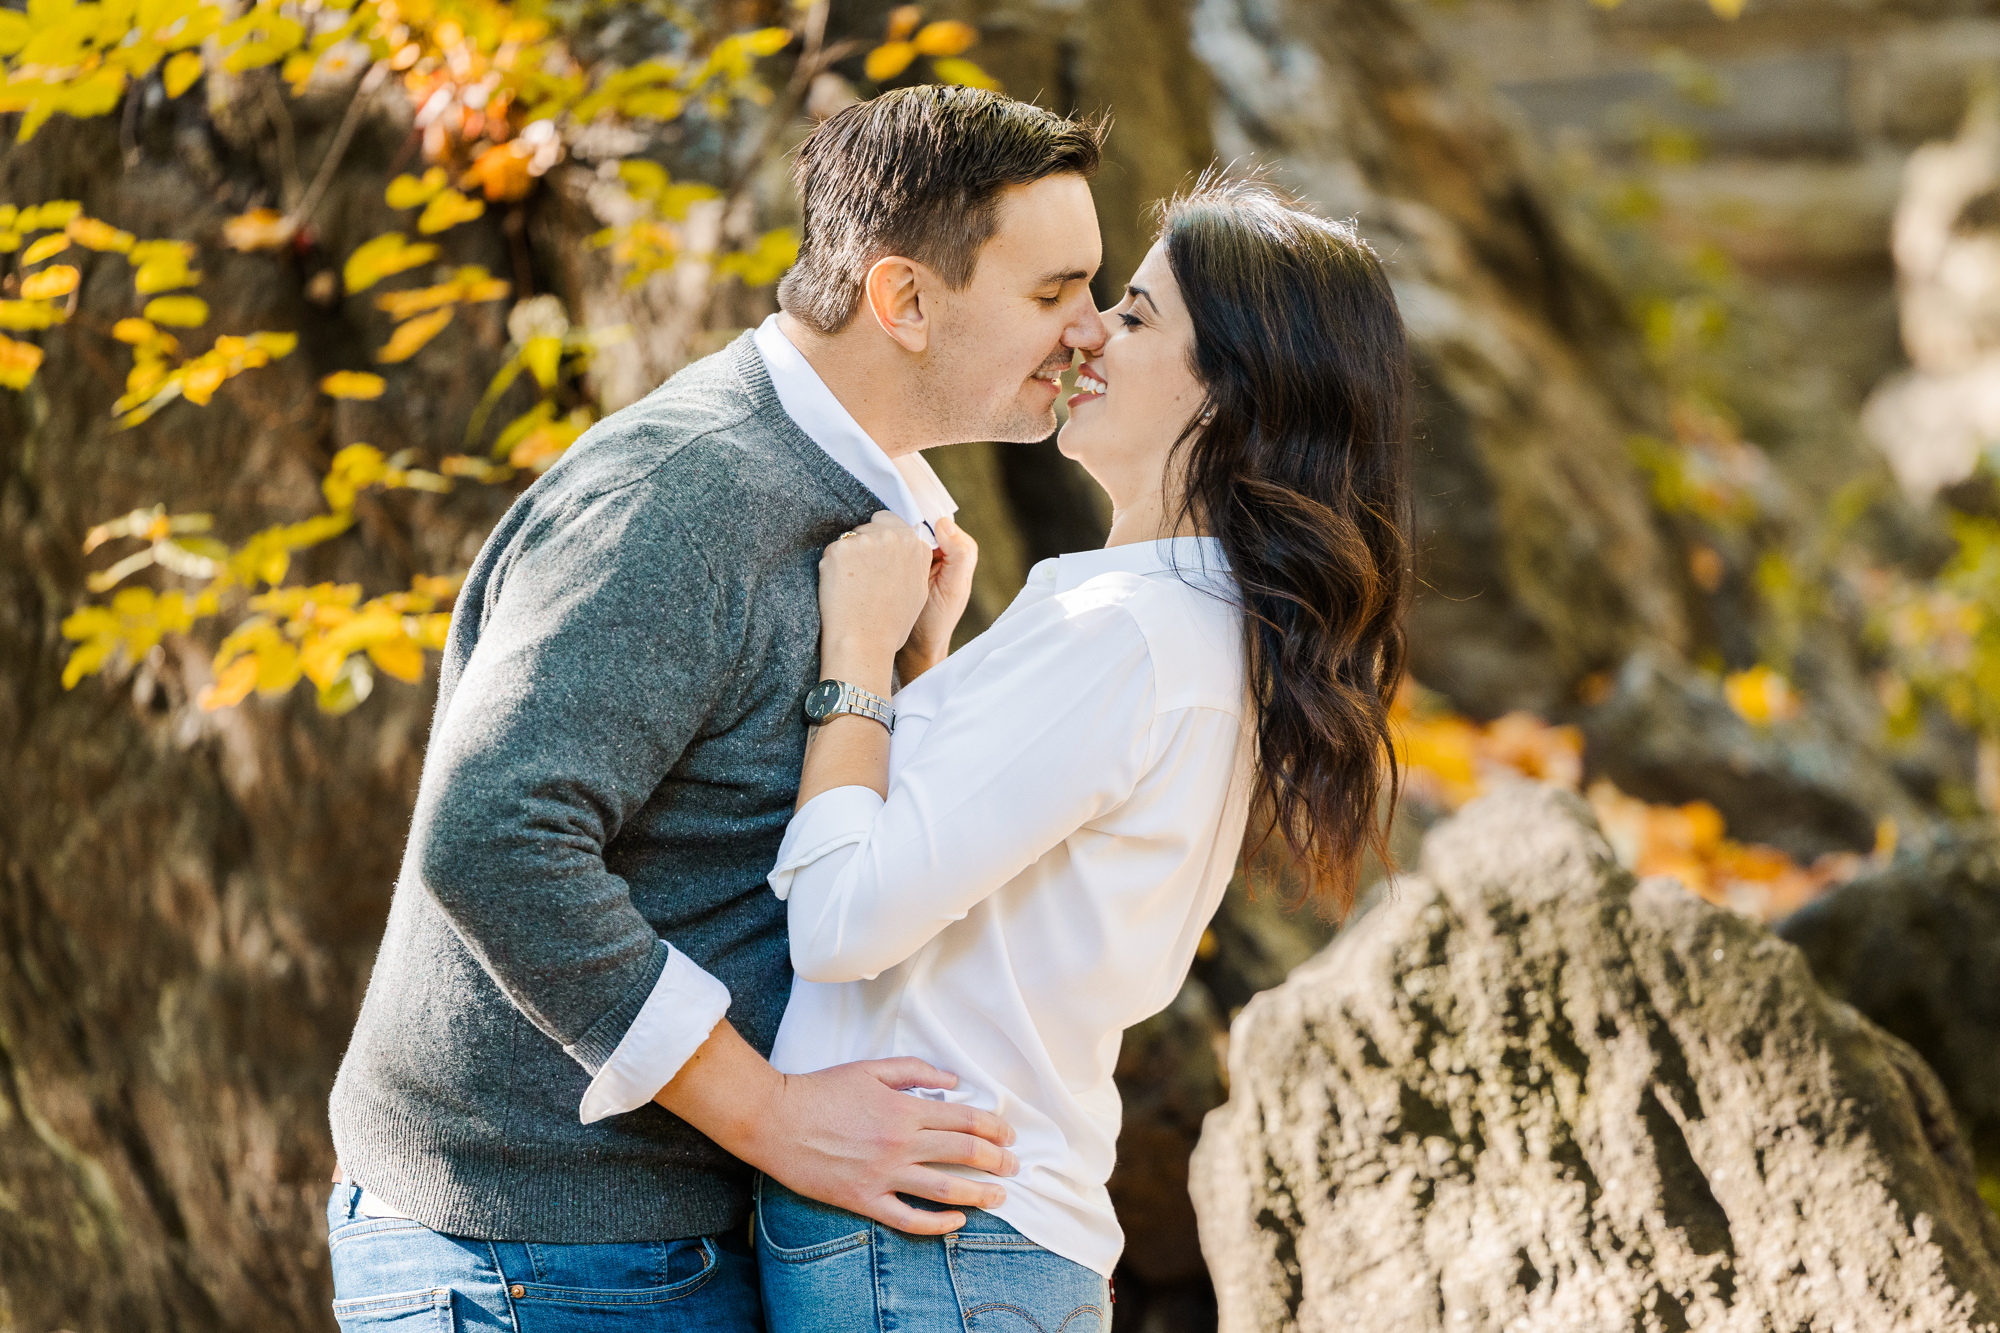 Fun Upper West Side Engagement Photo Shoot in NYC